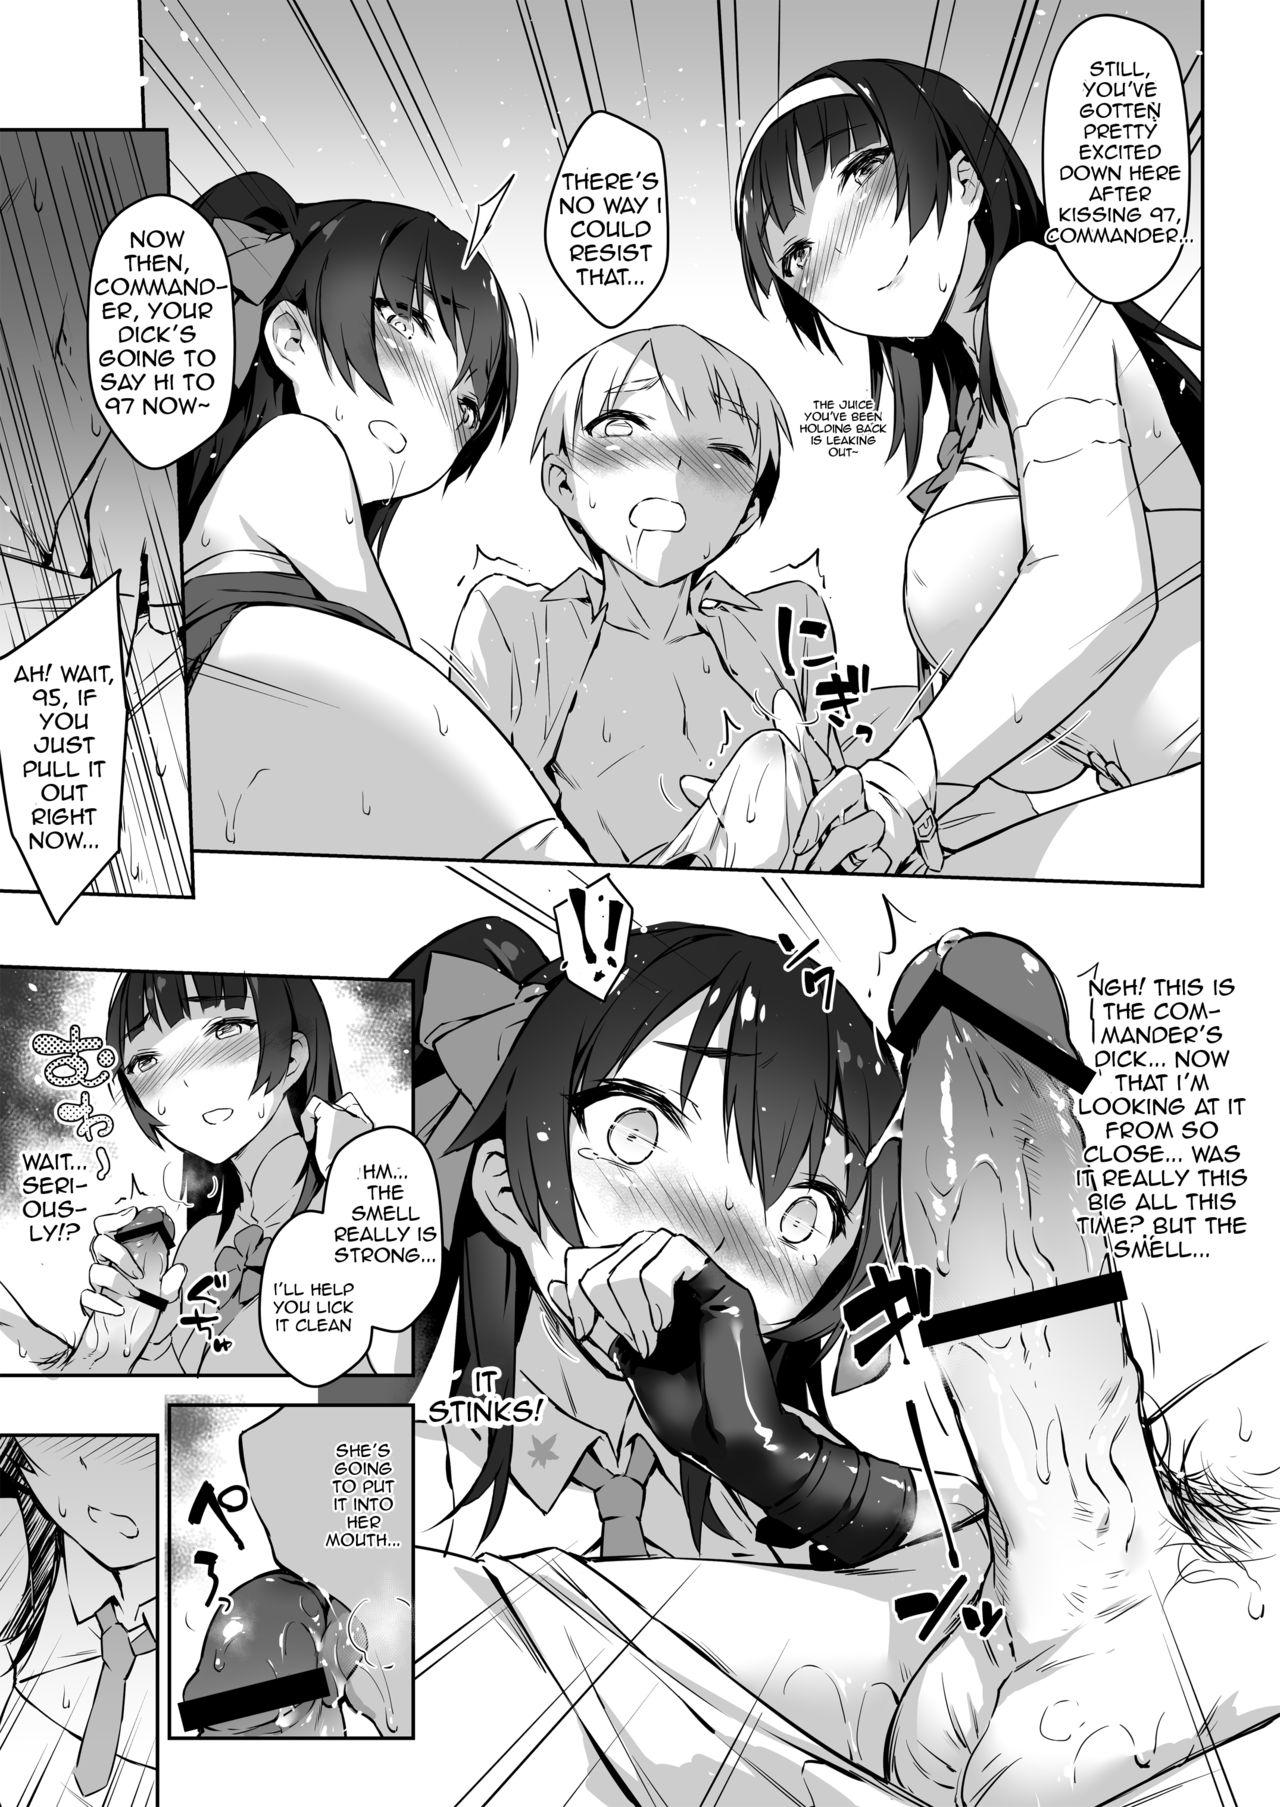 Casero Type 95 Type 97, Let Your Big Sister Teach You! - Girls frontline Africa - Page 11